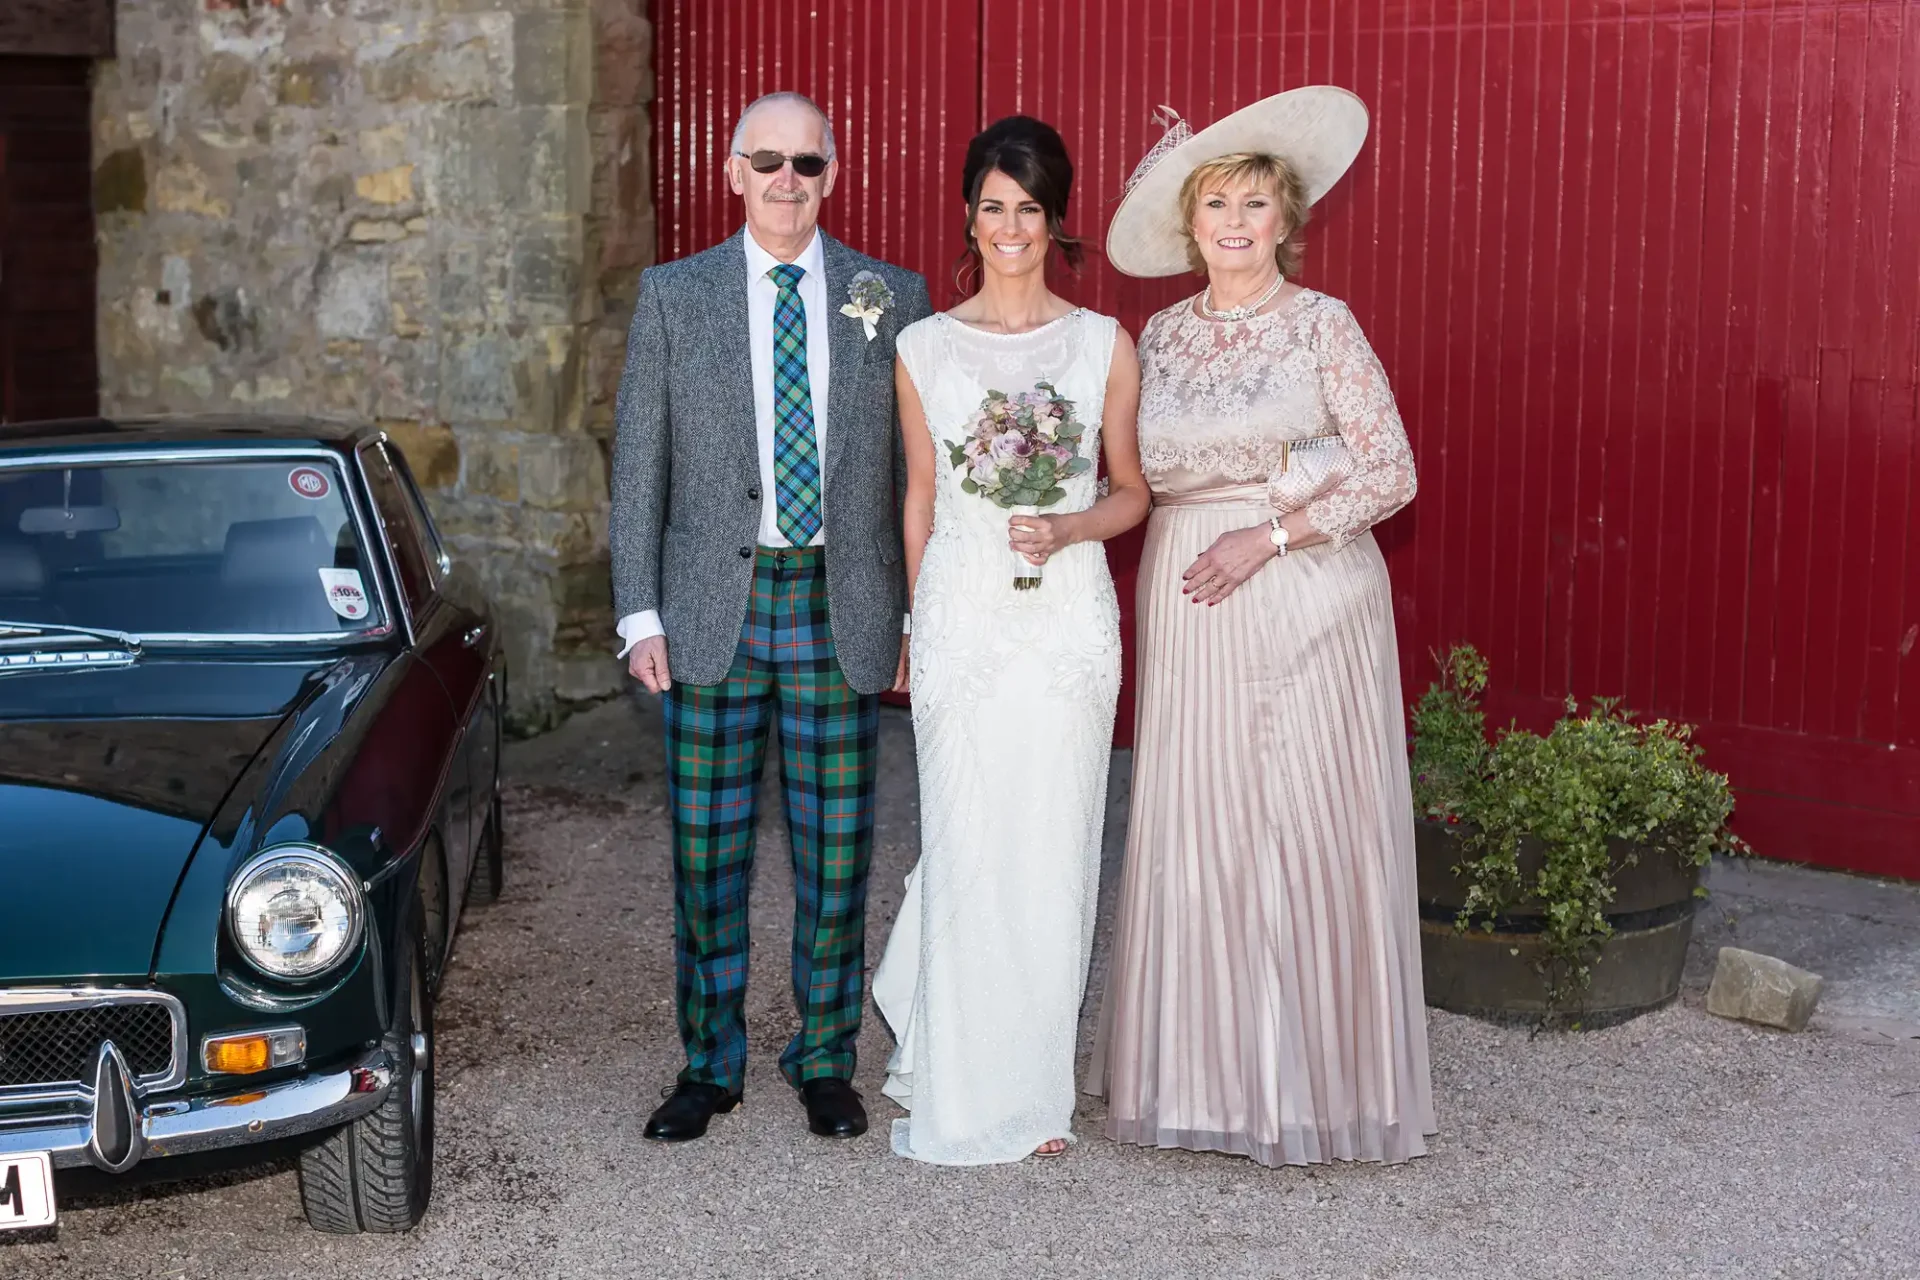 A bride in a white dress stands with an older couple by a classic car; the man in a plaid kilt and the woman in a beige dress and hat.